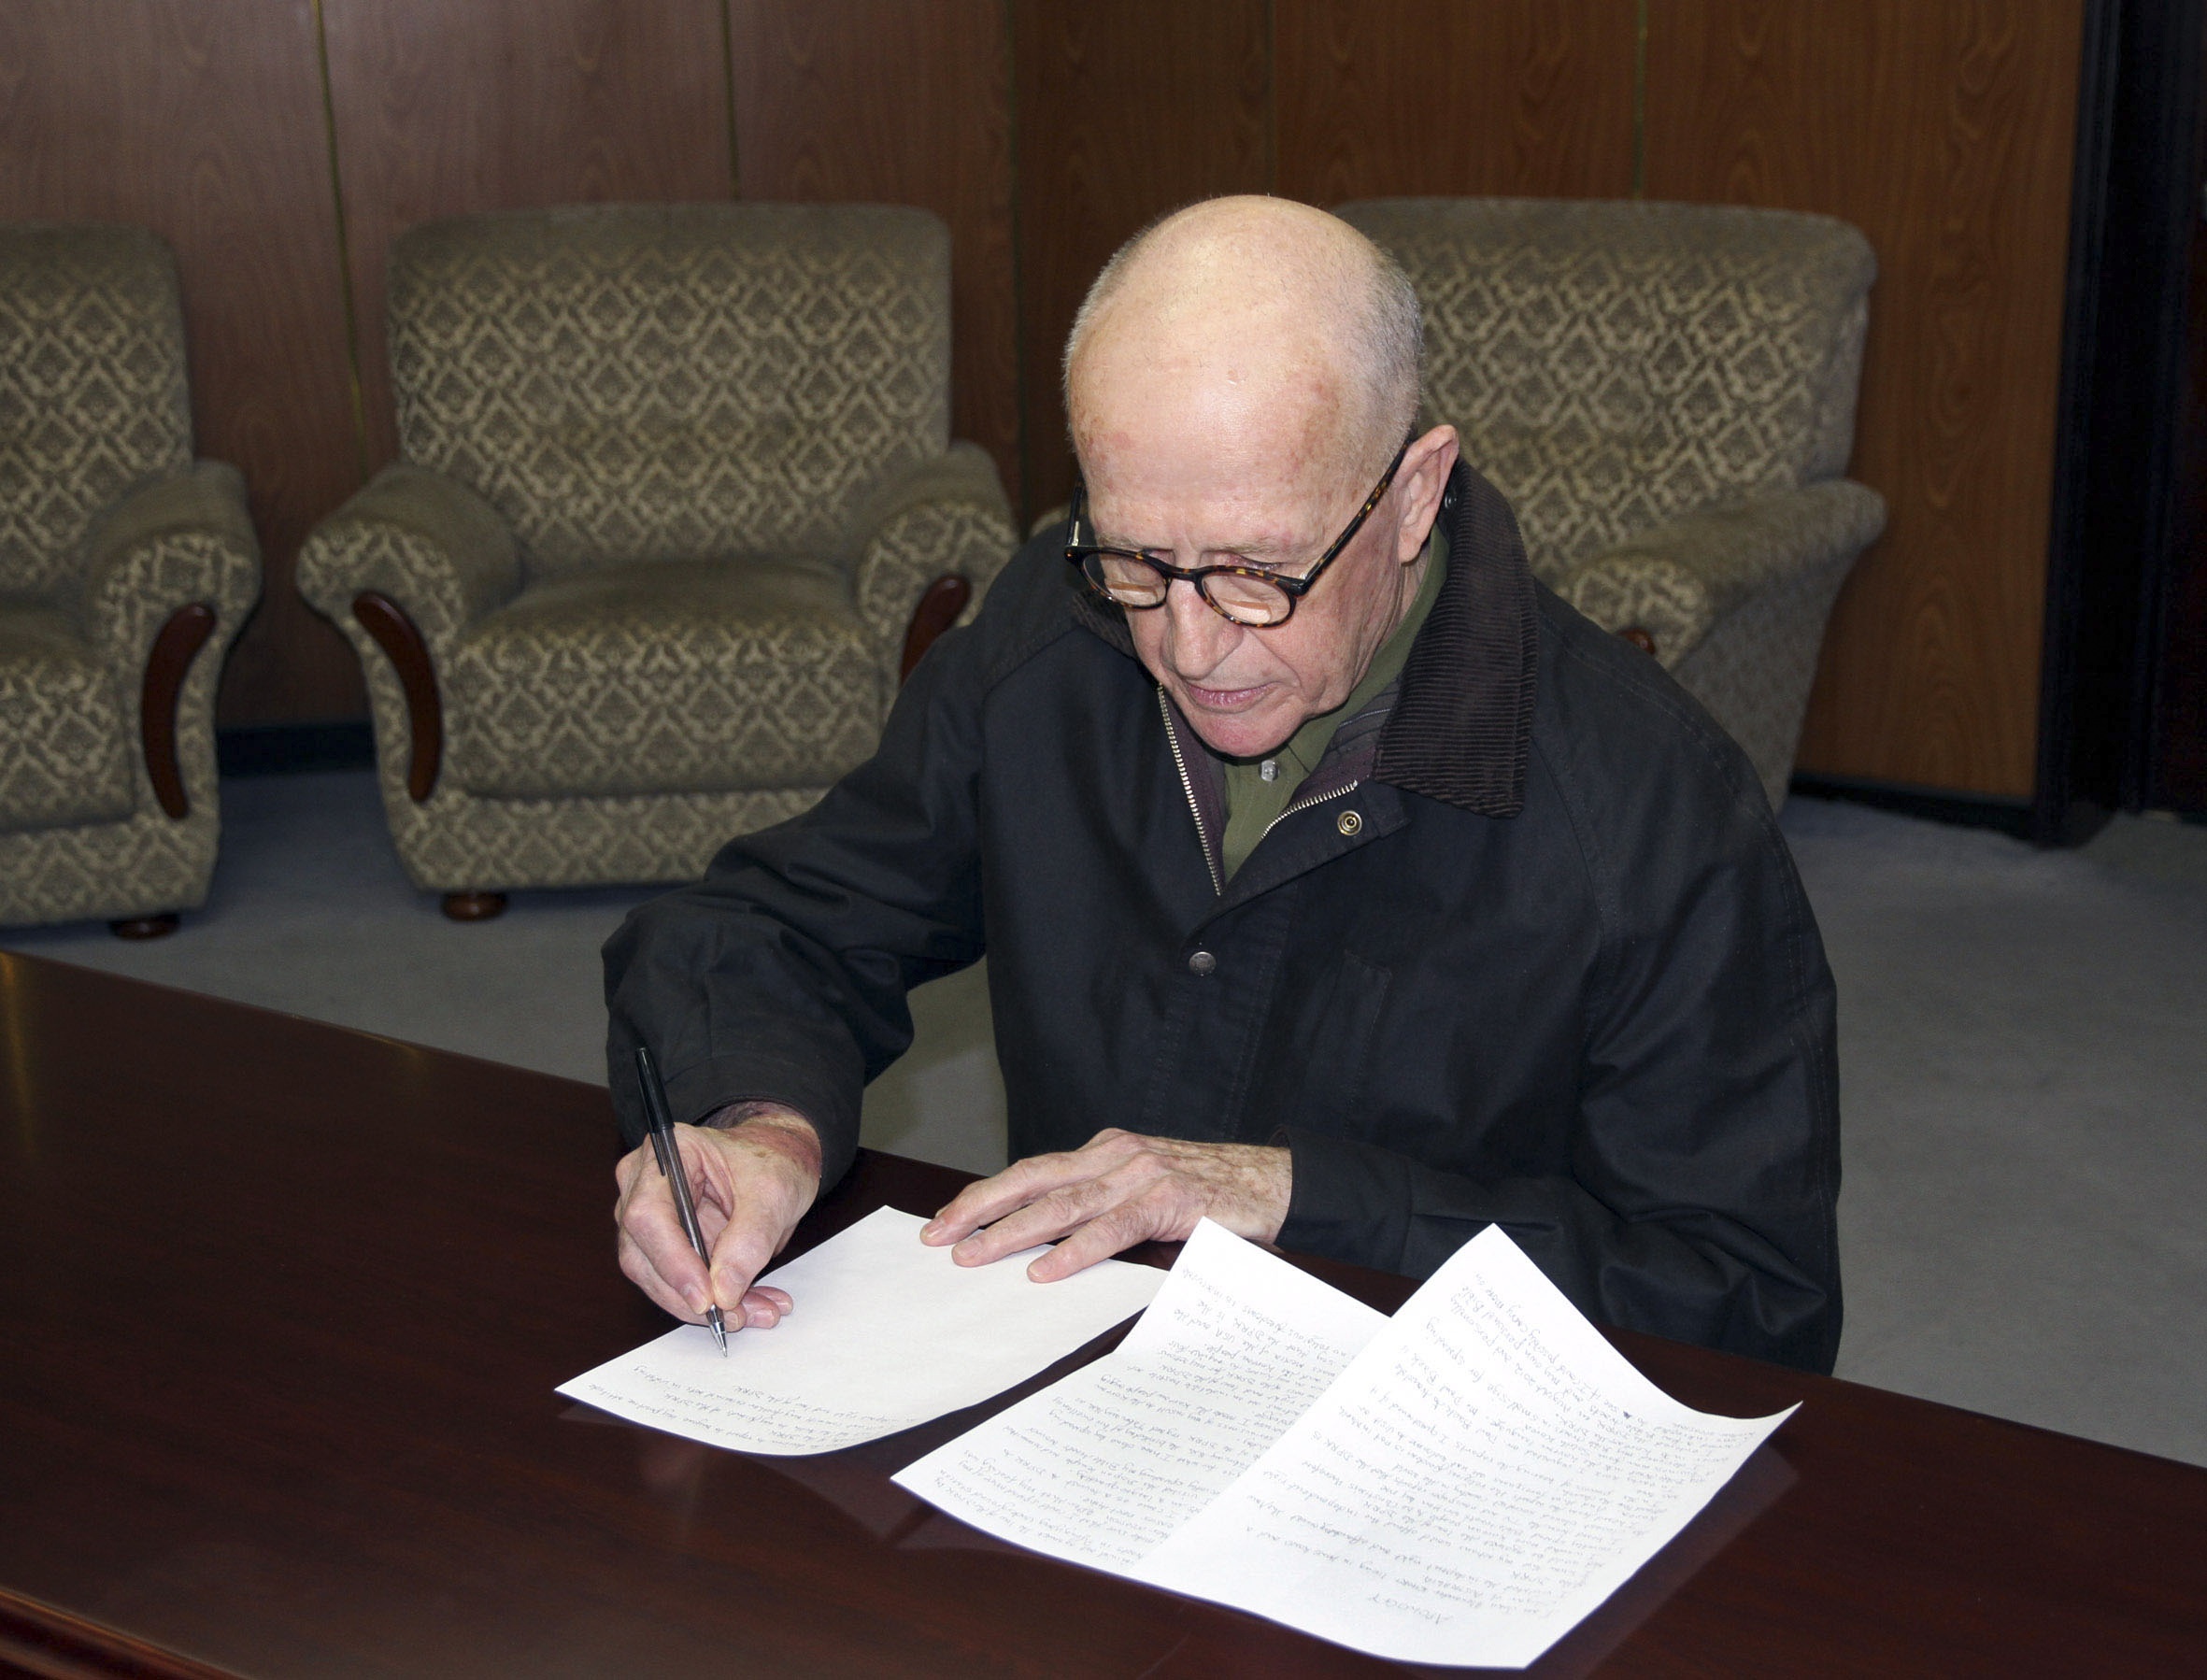 The state-run KCNA news agency released this photo of Short signing a written confession. Photo: KCNA / Reuters